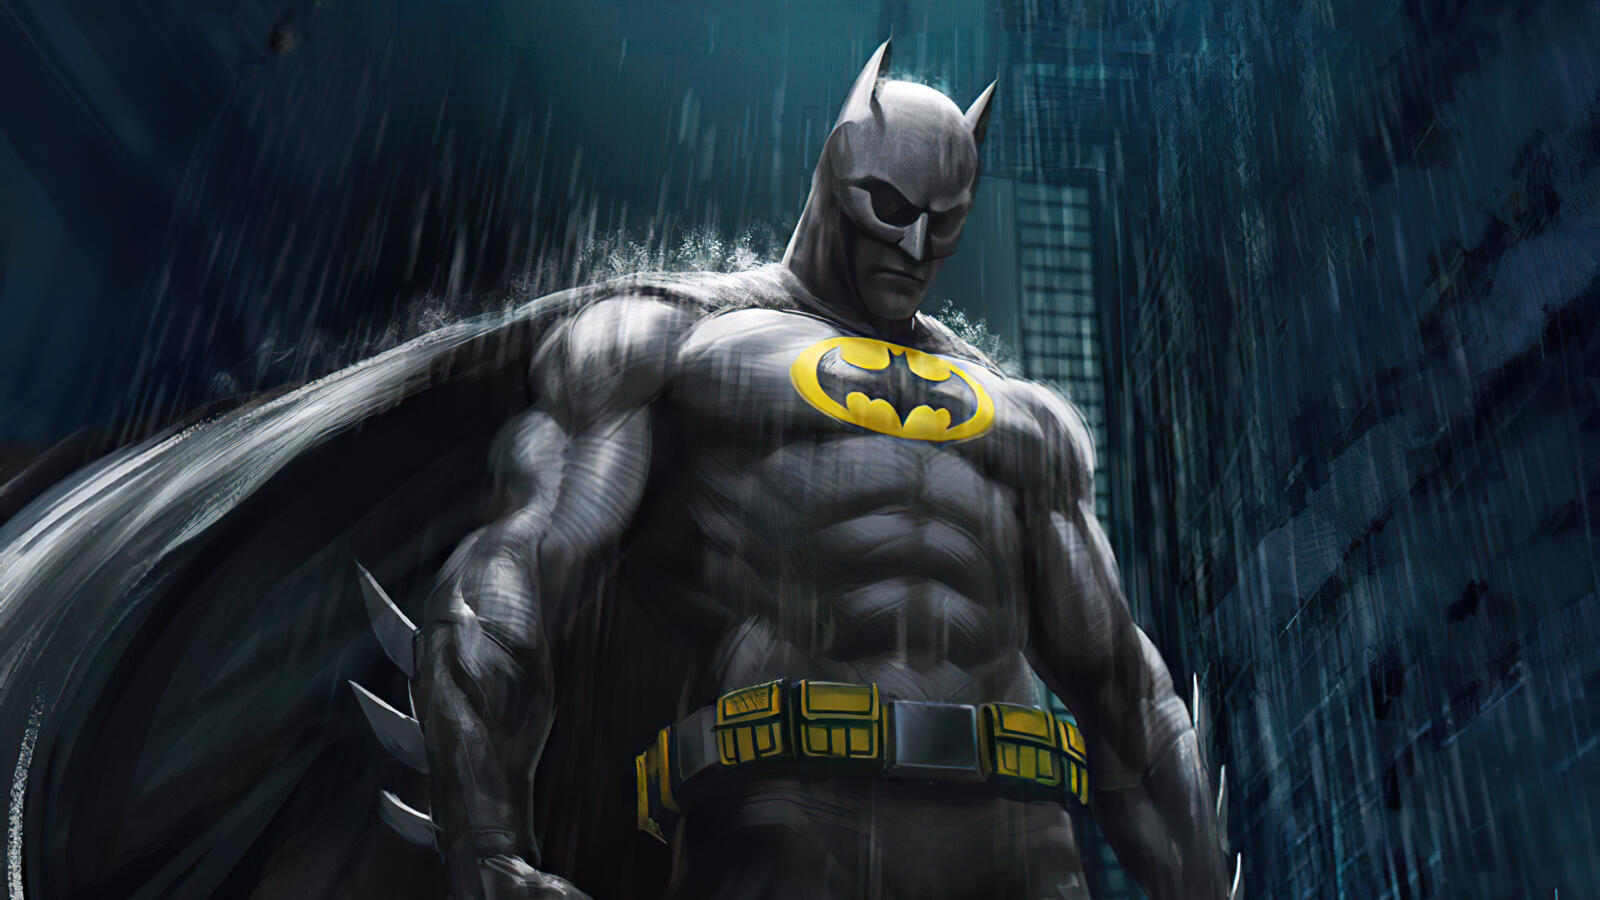 Free photo Batman stands in the rain at night